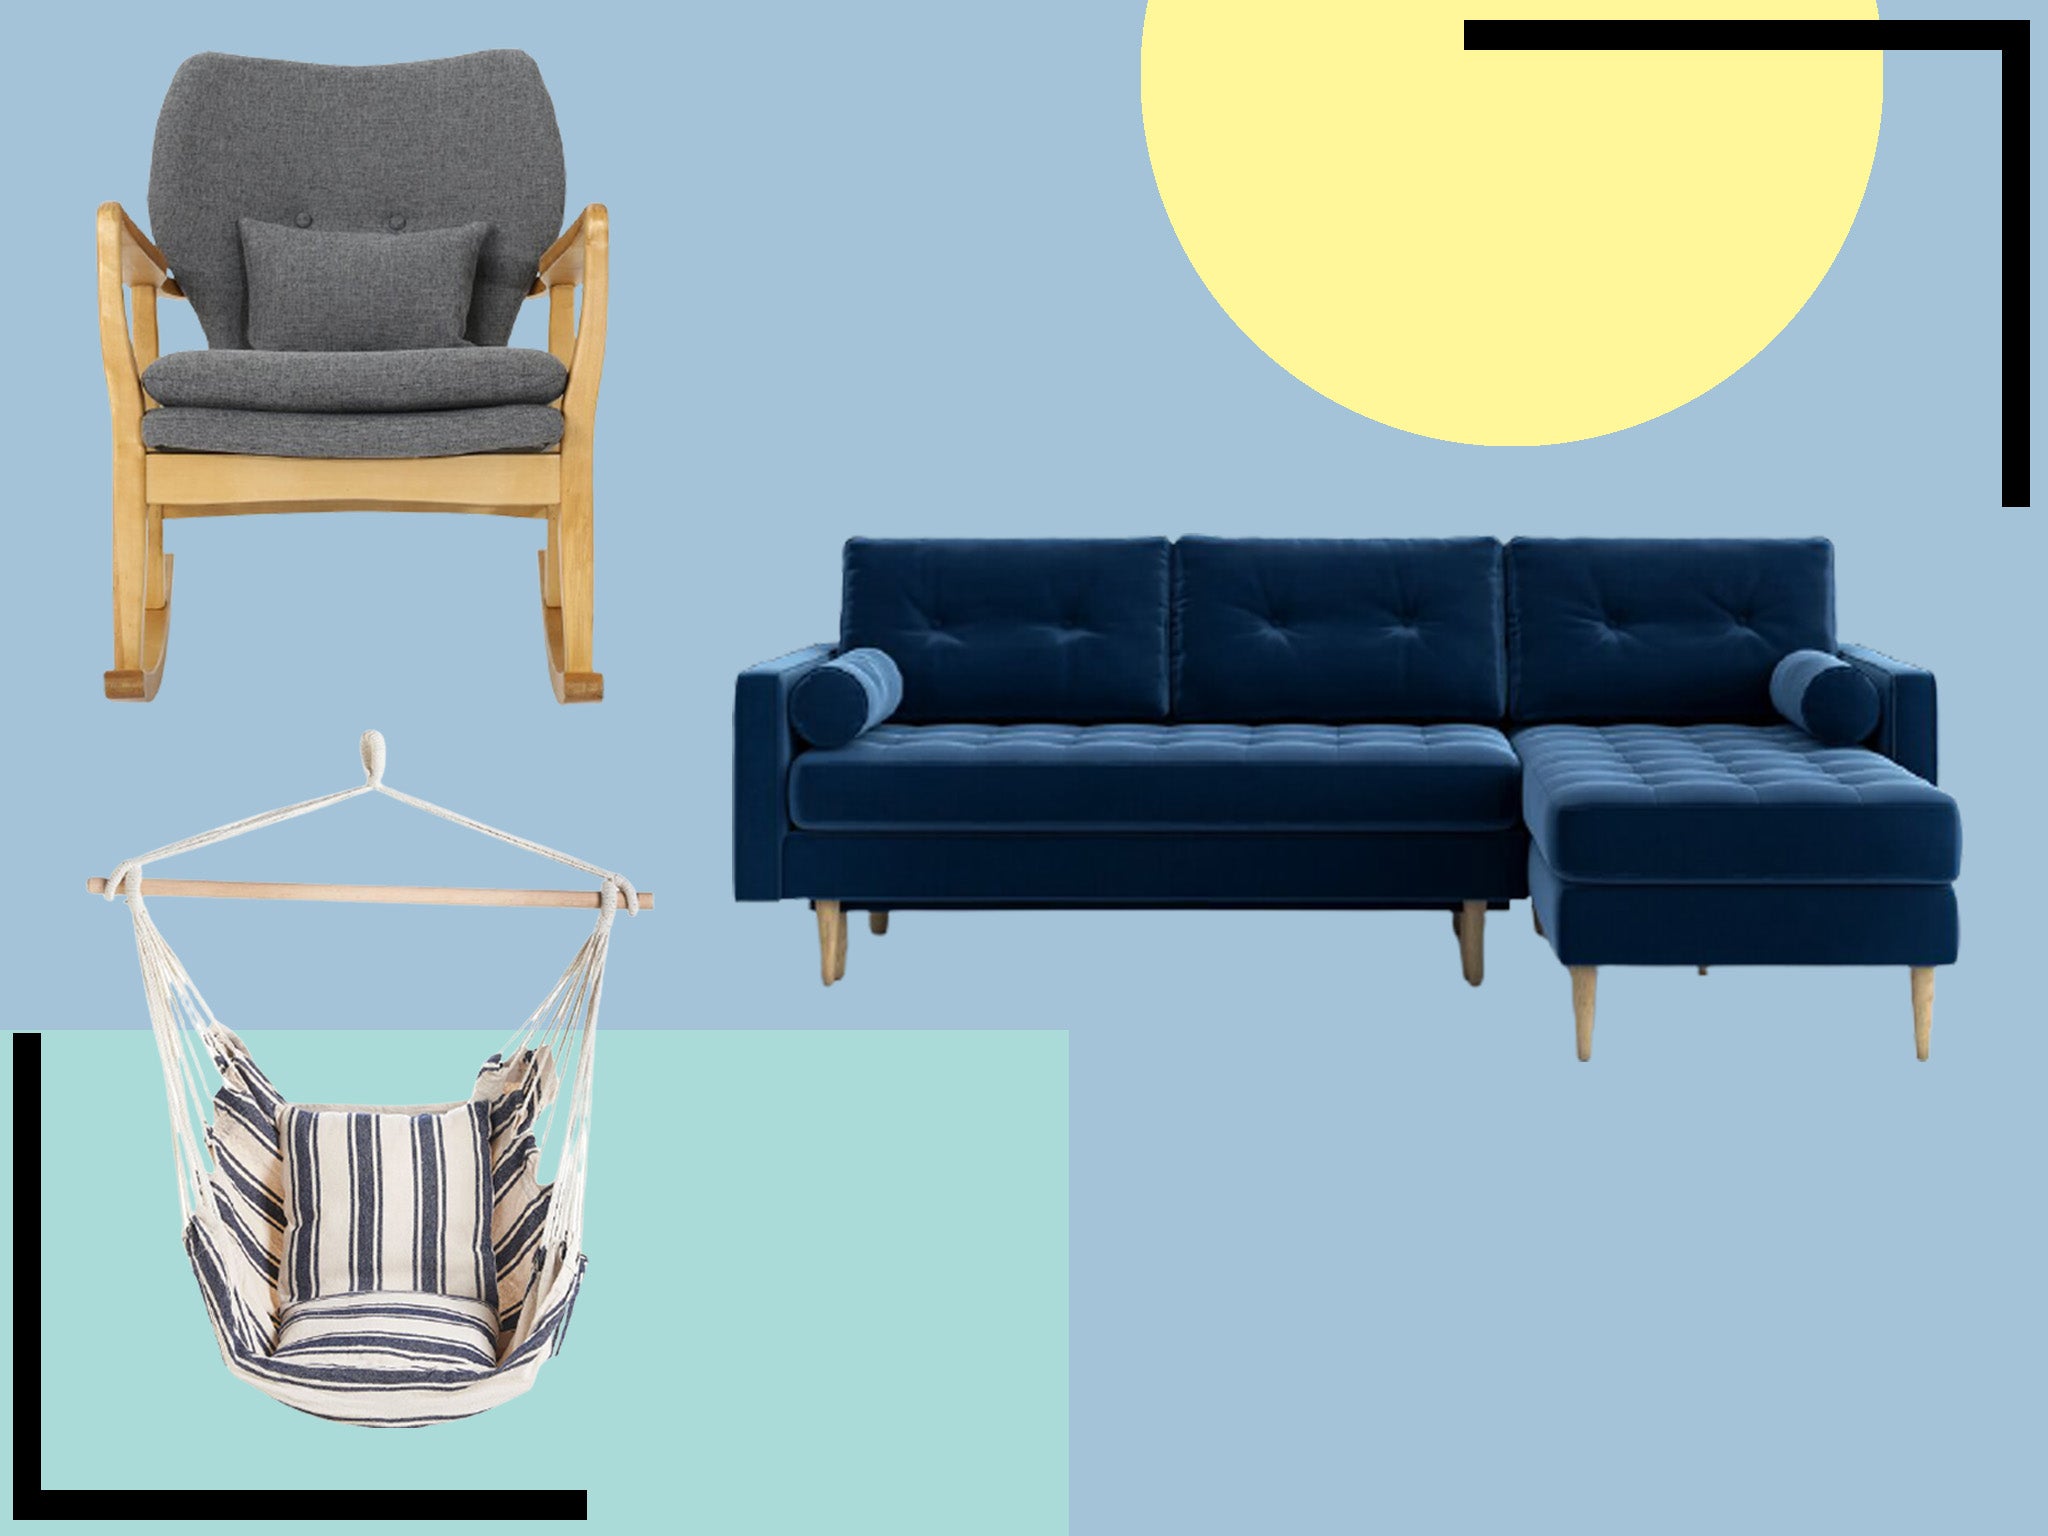 Upgrade your furnishings with these time-limited offers